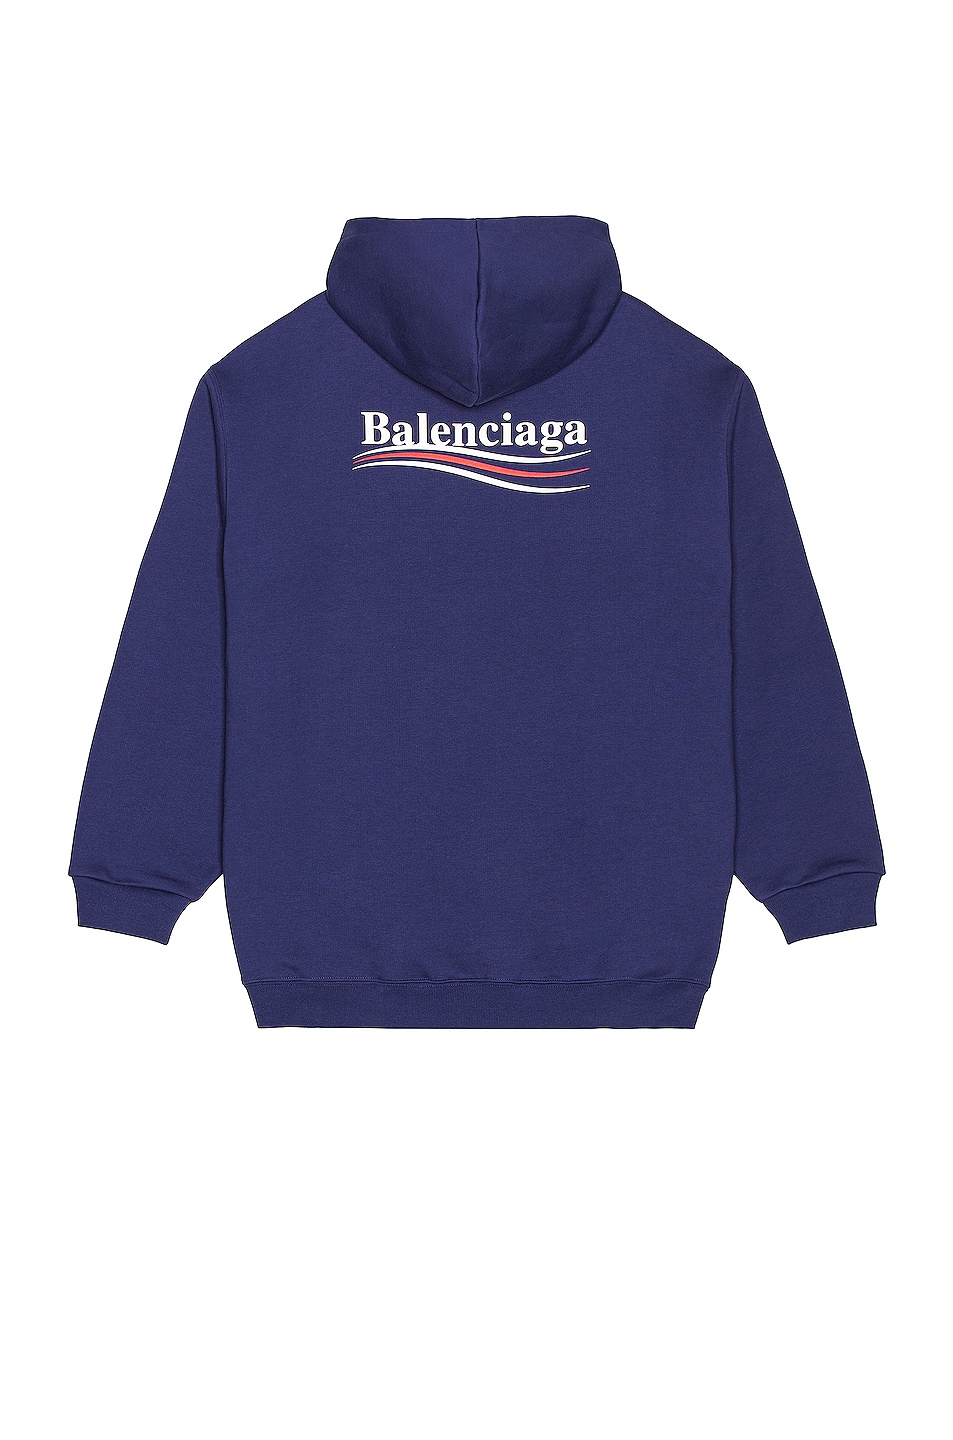 Image 1 of Balenciaga Hoodie in Pacific Blue & White